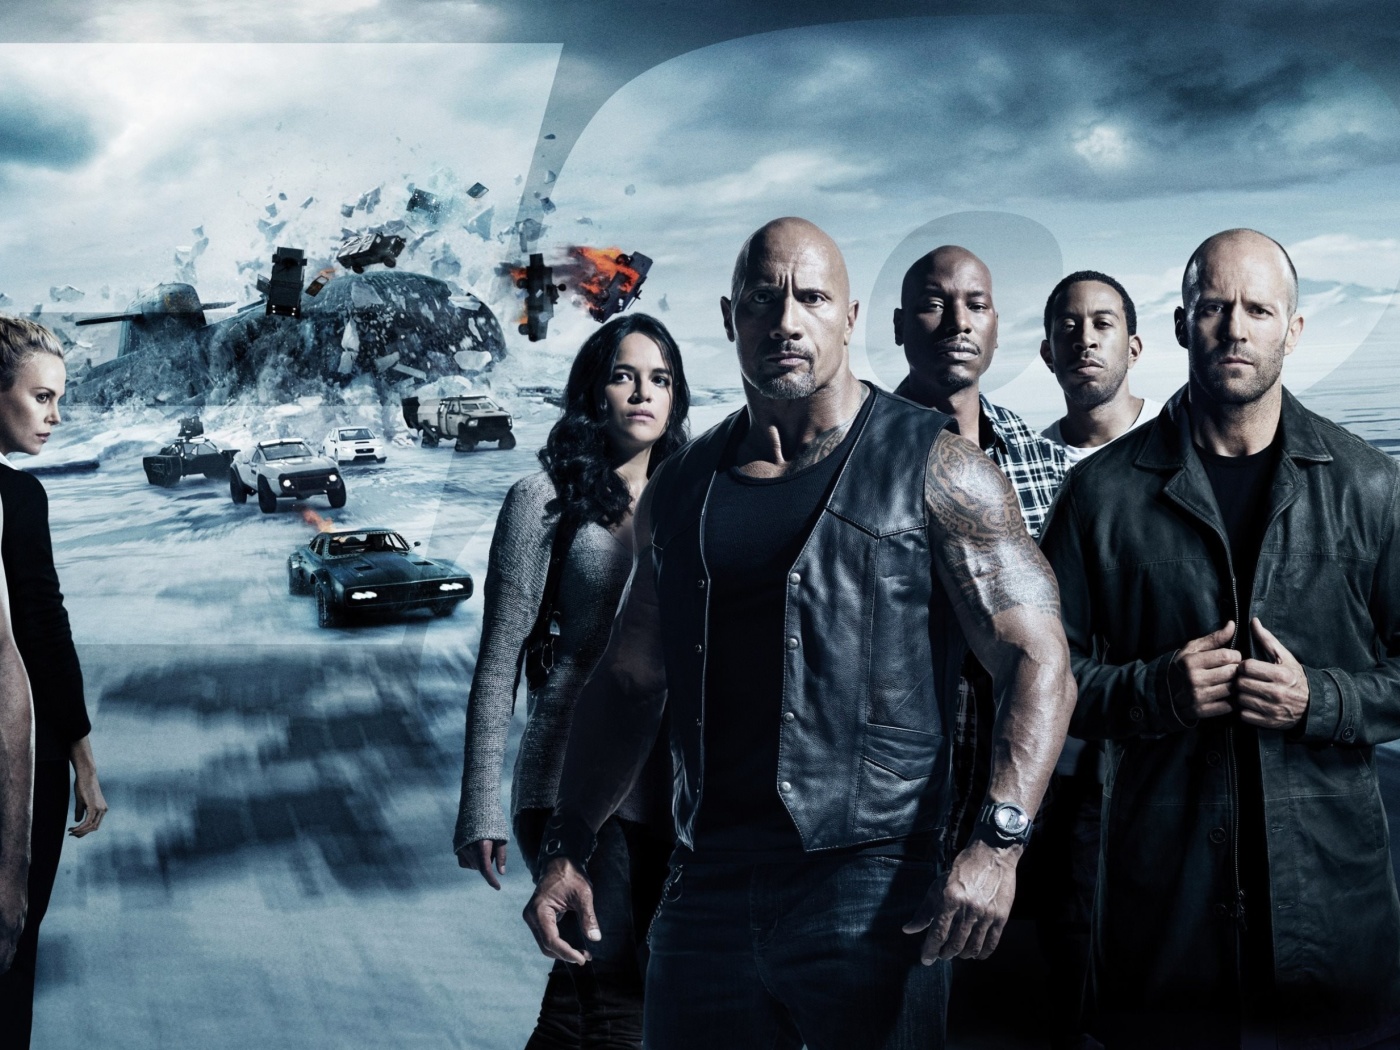 Sfondi The Fate of the Furious with Vin Diesel, Dwayne Johnson, Charlize Theron 1400x1050